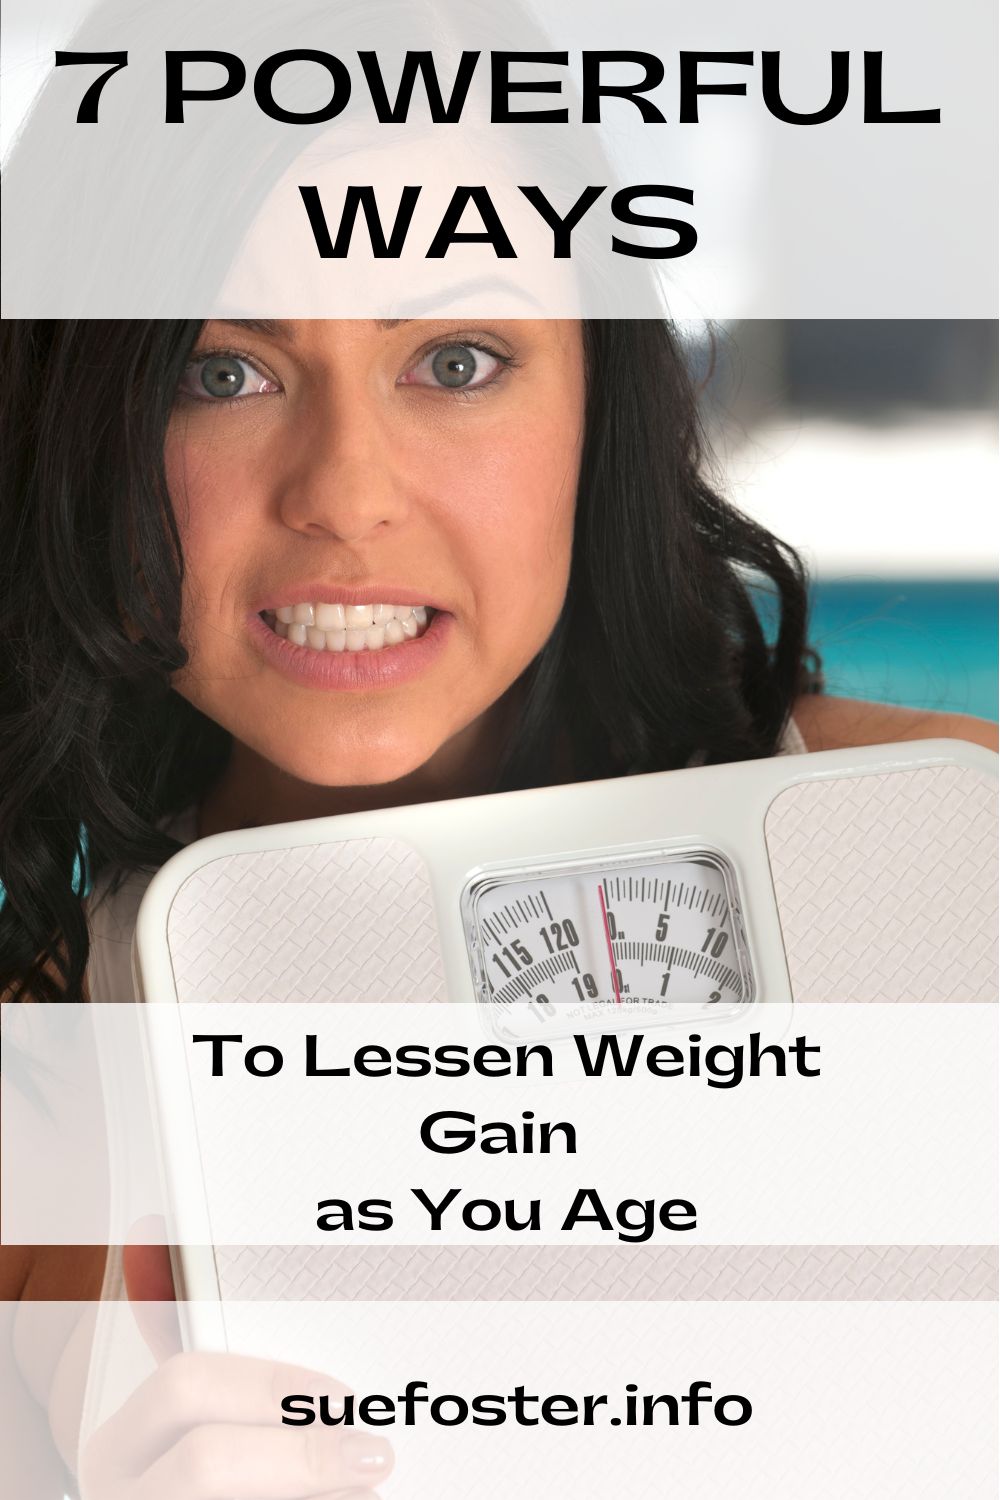 Age-Related Weight Gain: Causes and How to Manage